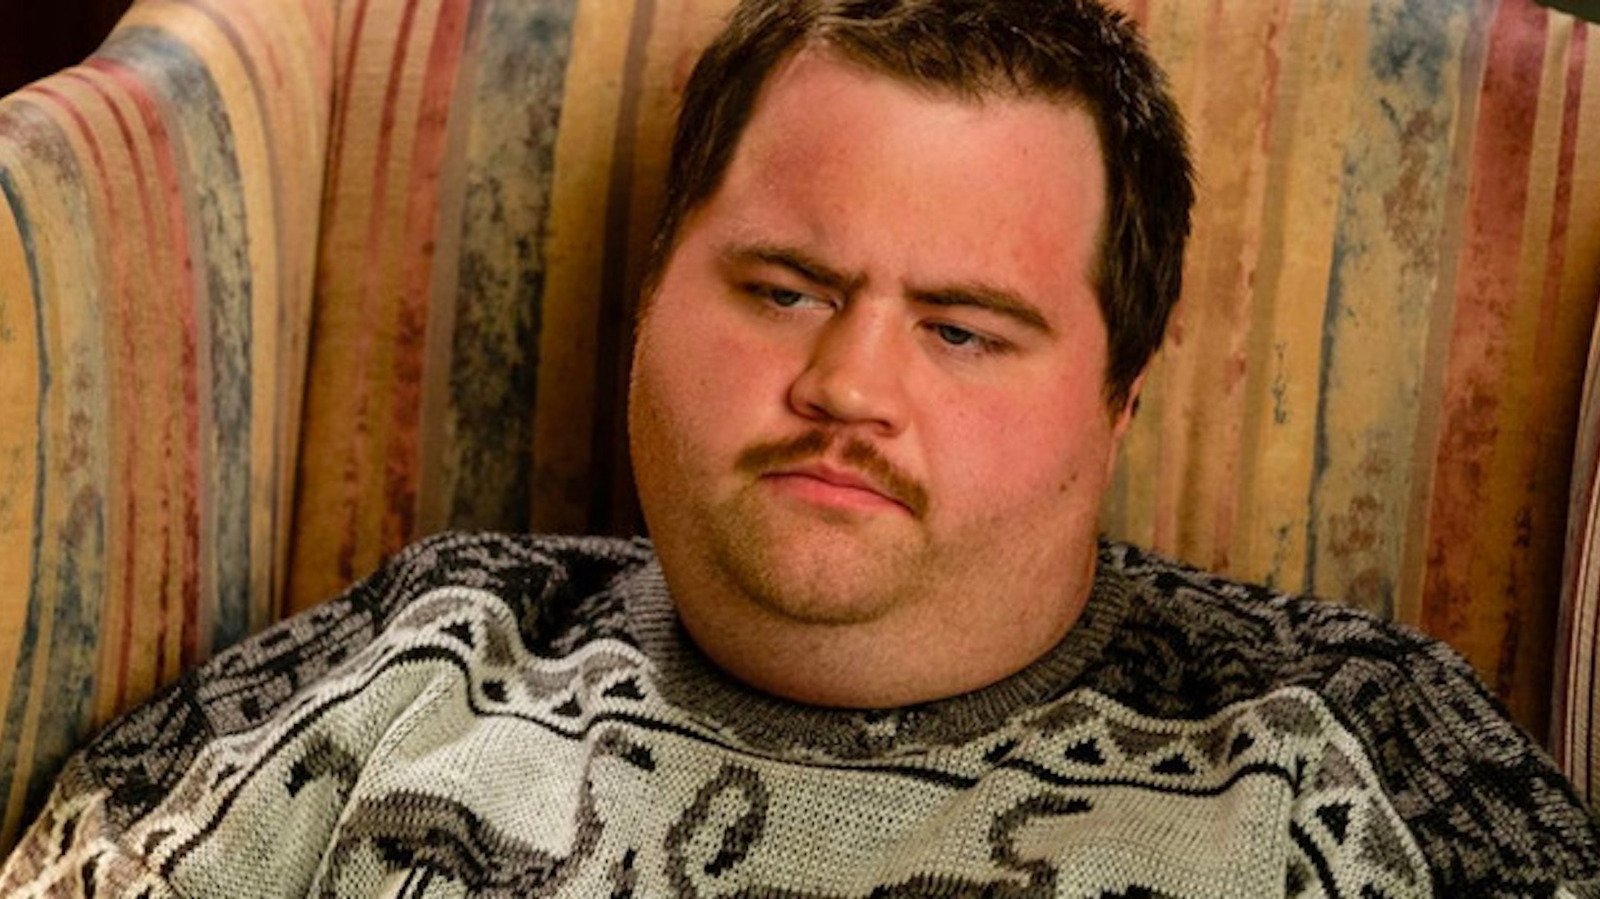 A Chris Farley Biopic Is At The Top Of Paul Walter Hauser's Wishlist